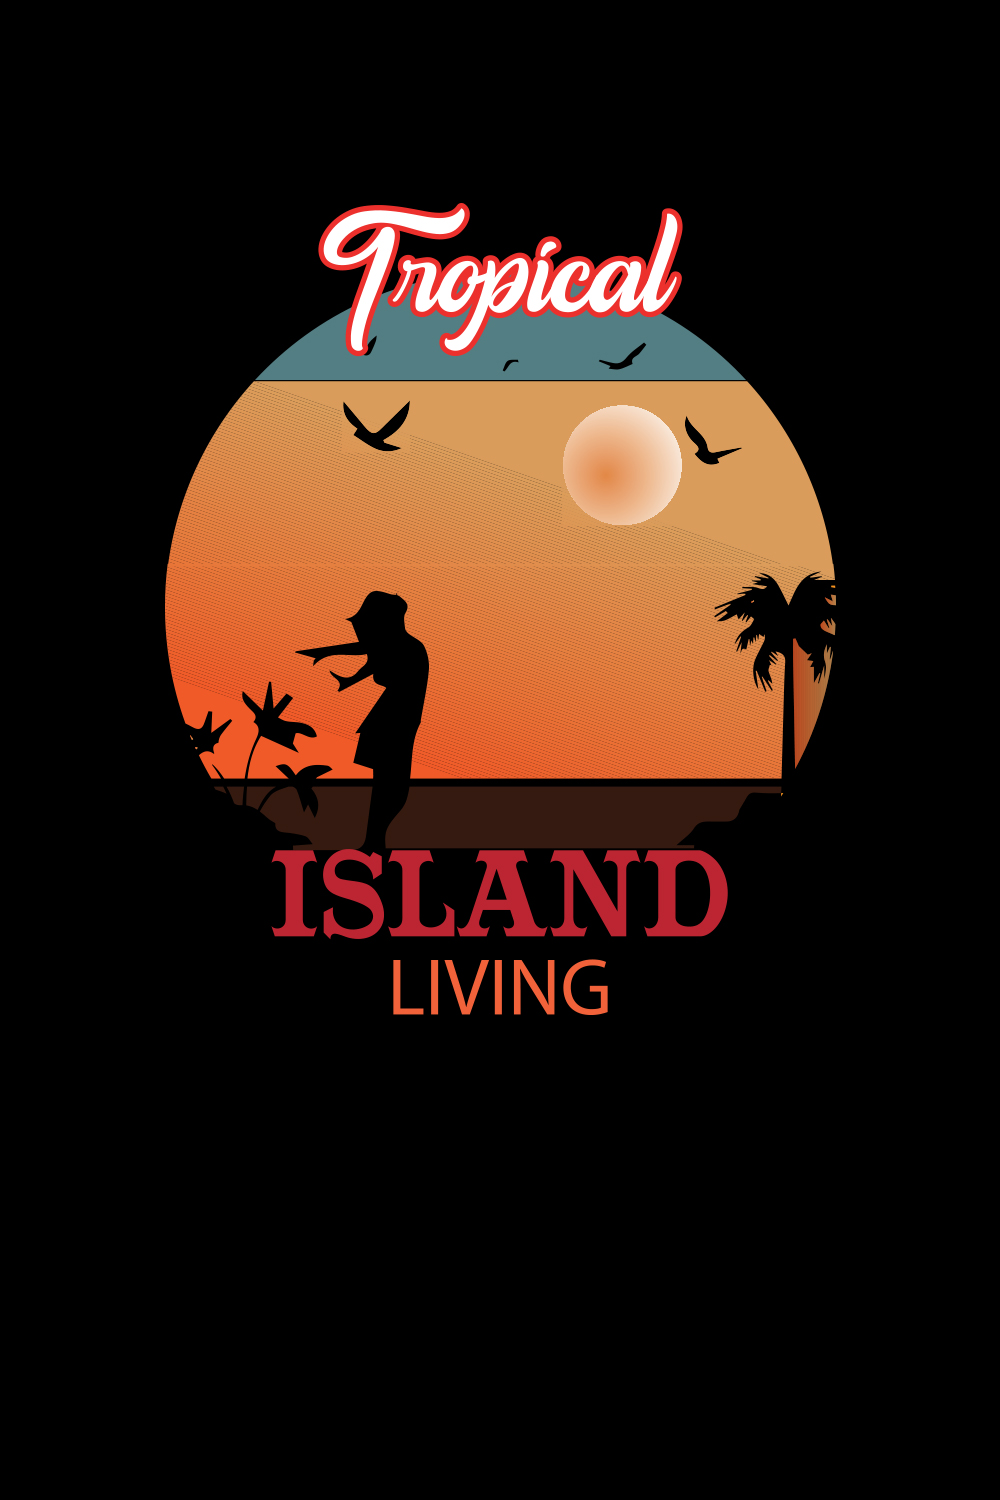 Tropical Island living pinterest preview image.